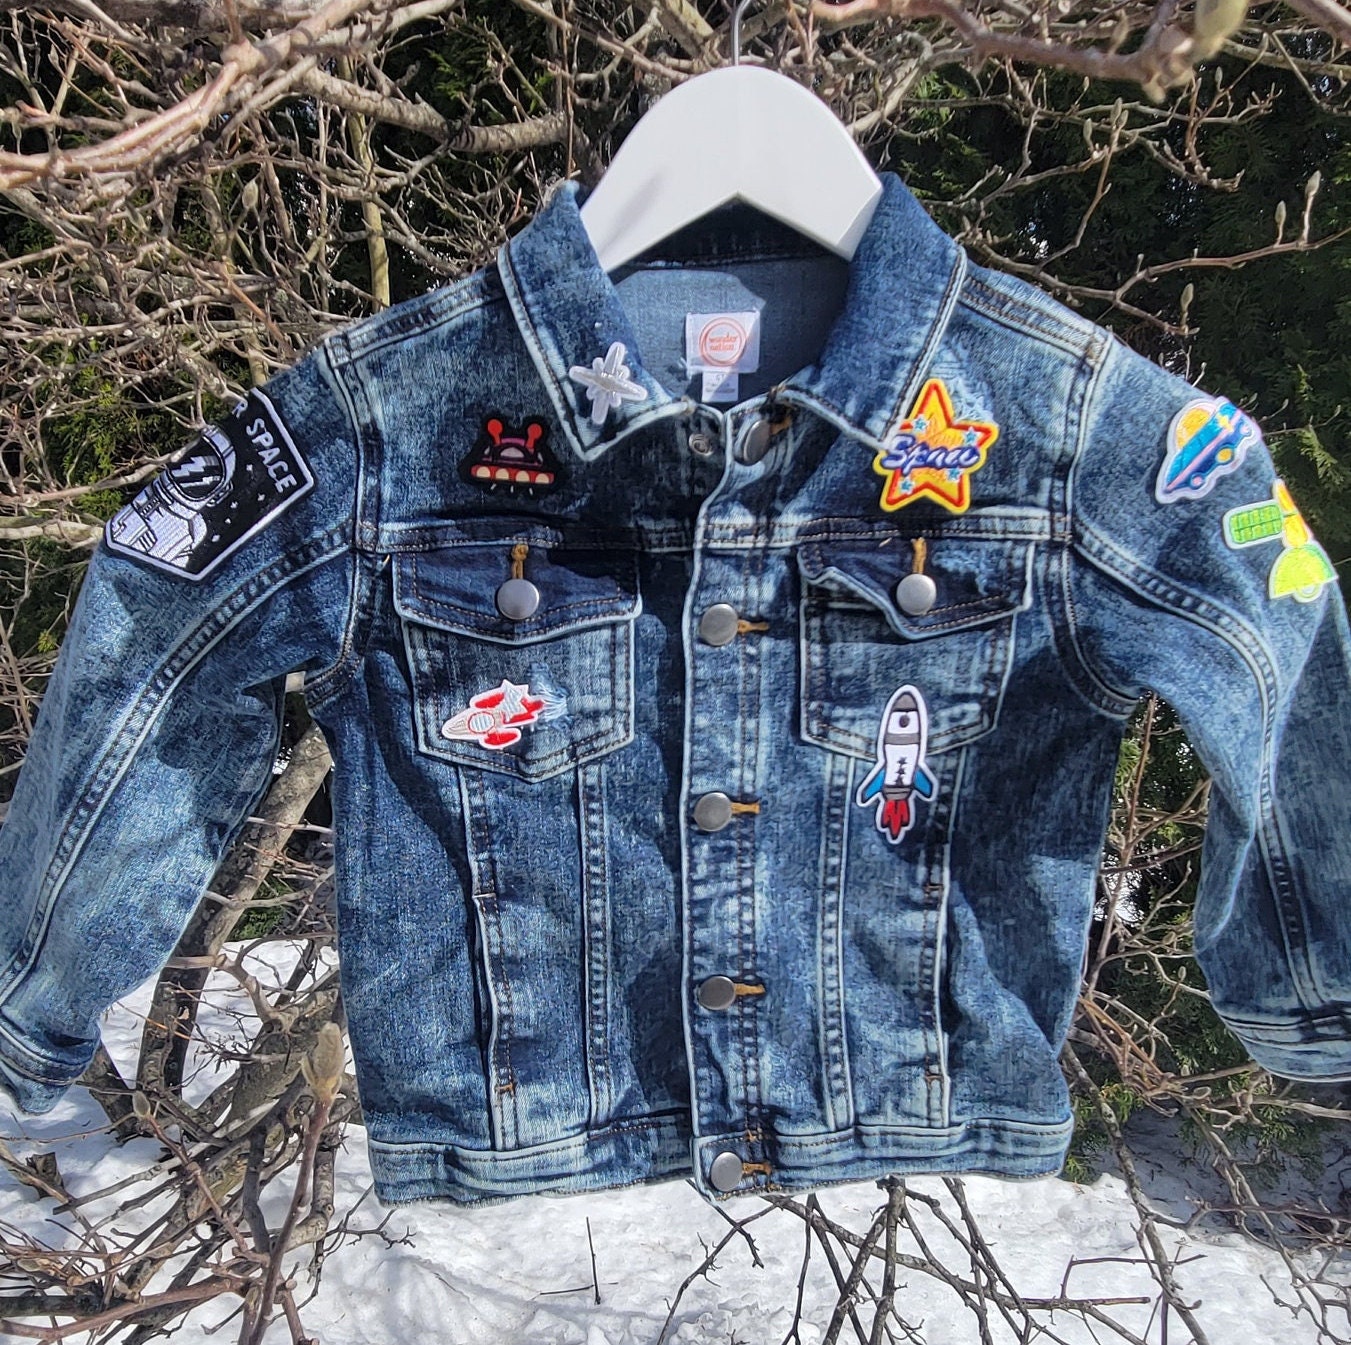 Cool Iron-On Patches to Customize a Denim Jacket – StyleCaster